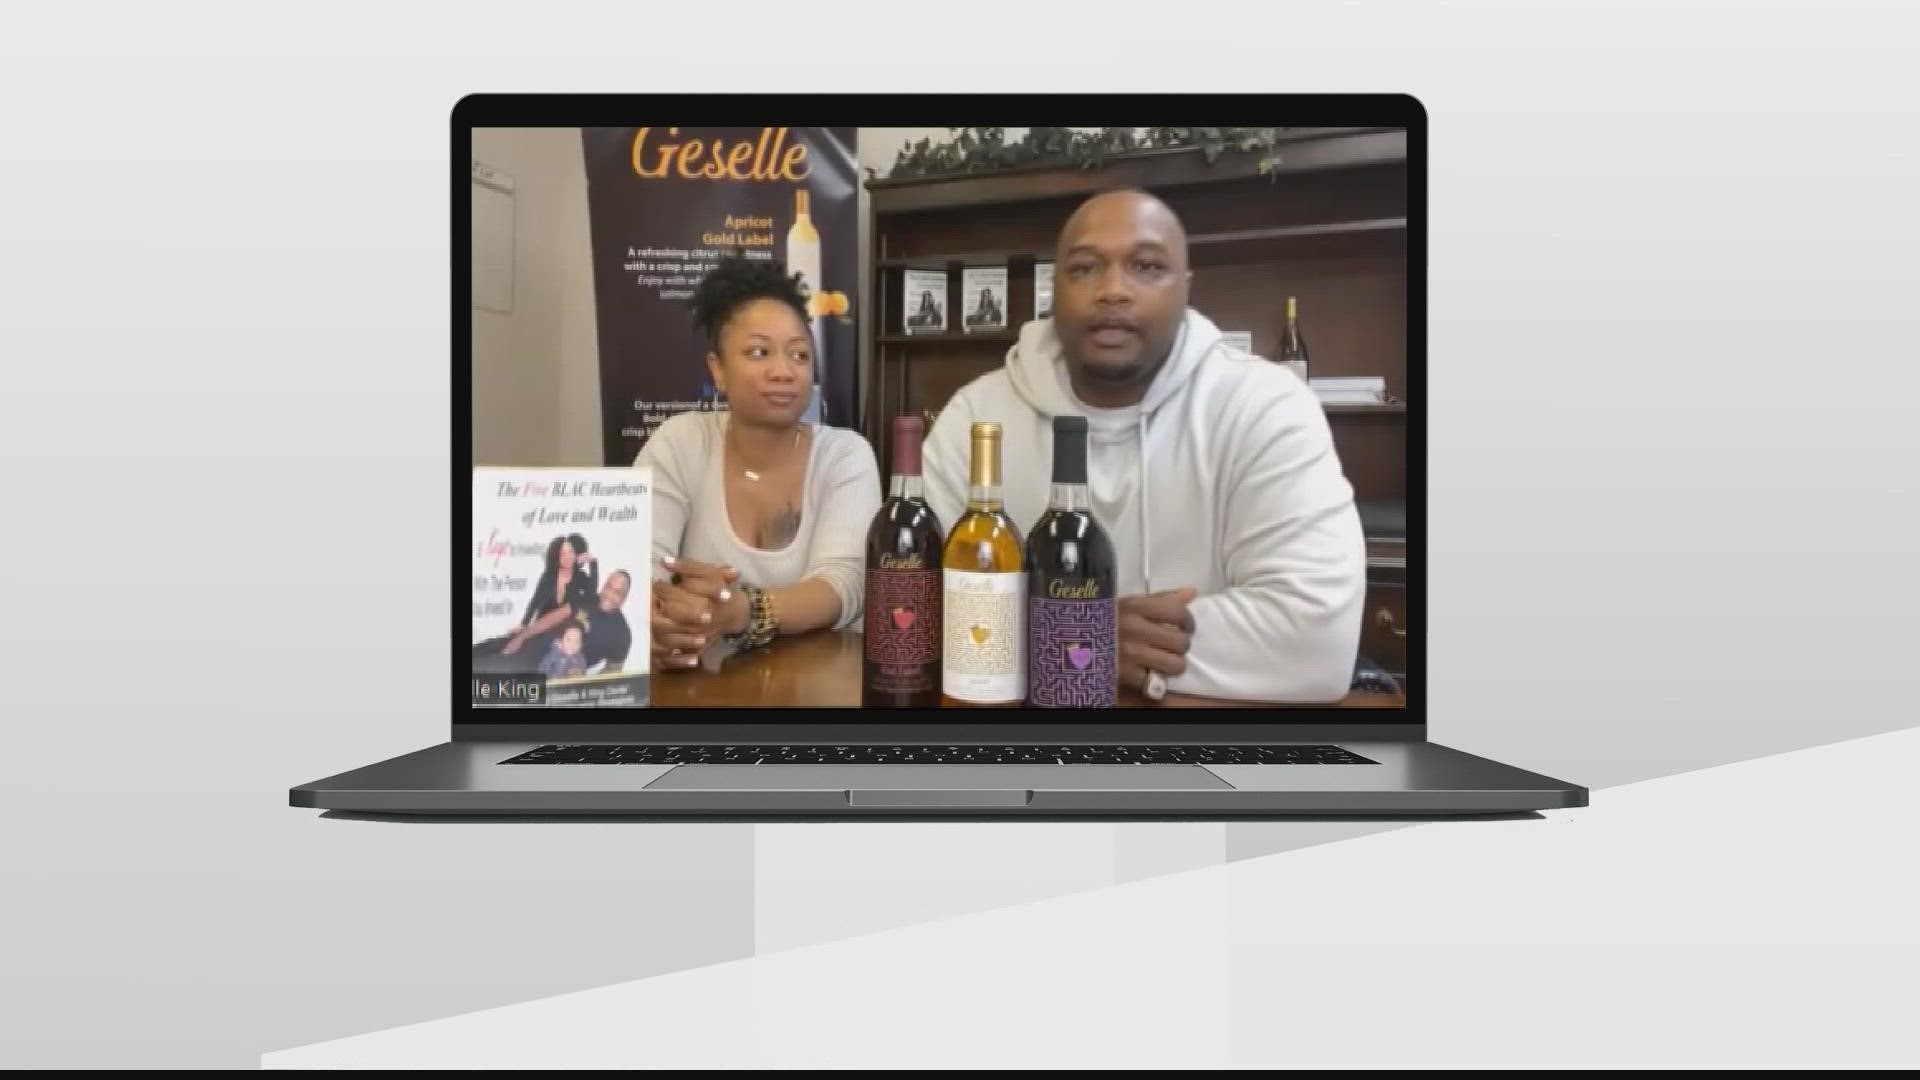 The wine company was created by married couple Tiffany and Donte Campbell. They were invited to Essence Fest in 2019, and were given the title of “best dessert wine.